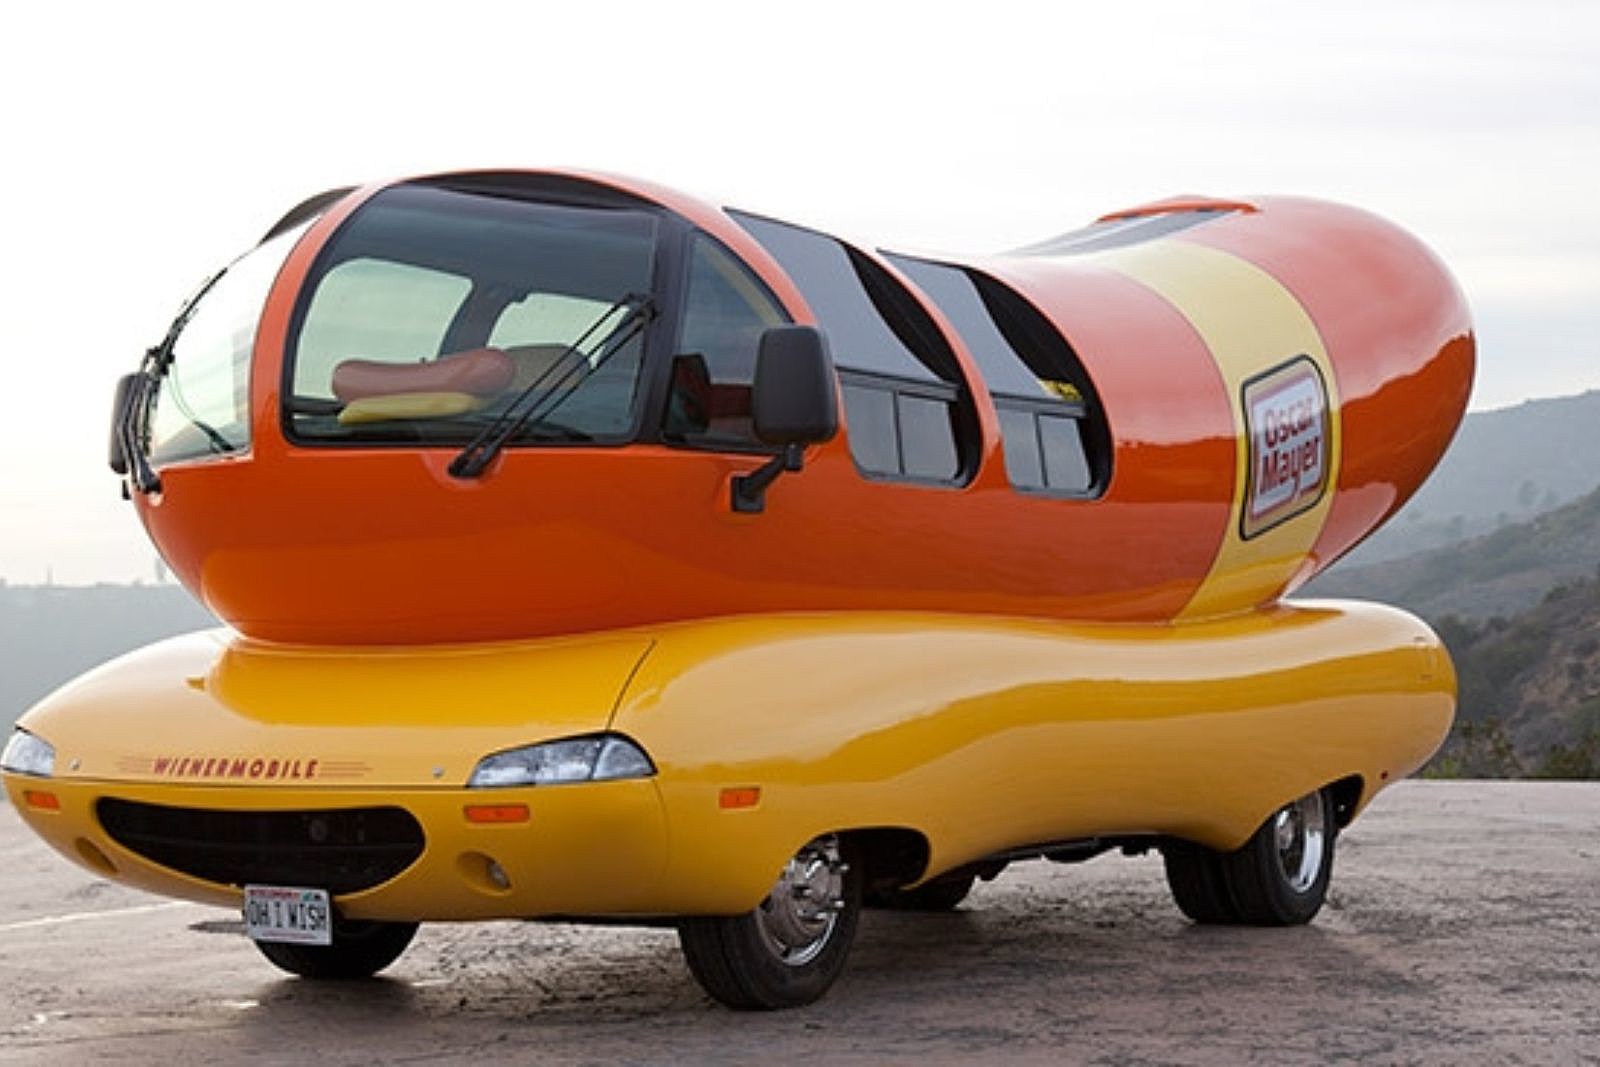 Wanna Get Paid for Driving the Oscar Mayer Wienermobile?